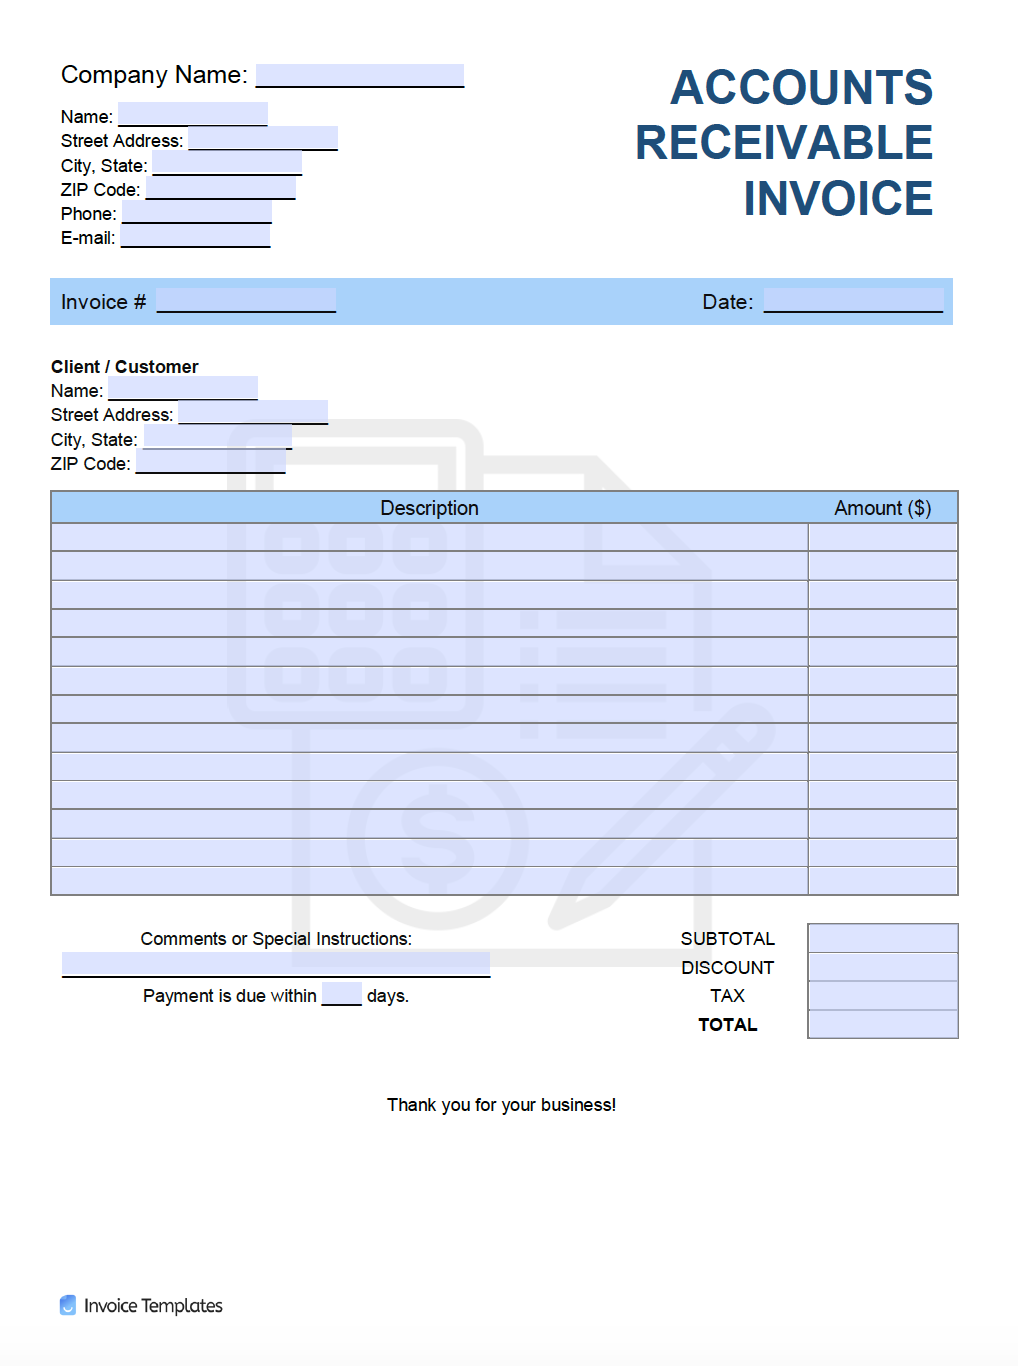 Free Accounts Receivable Invoice Template  PDF  WORD  EXCEL For Interest Invoice Template